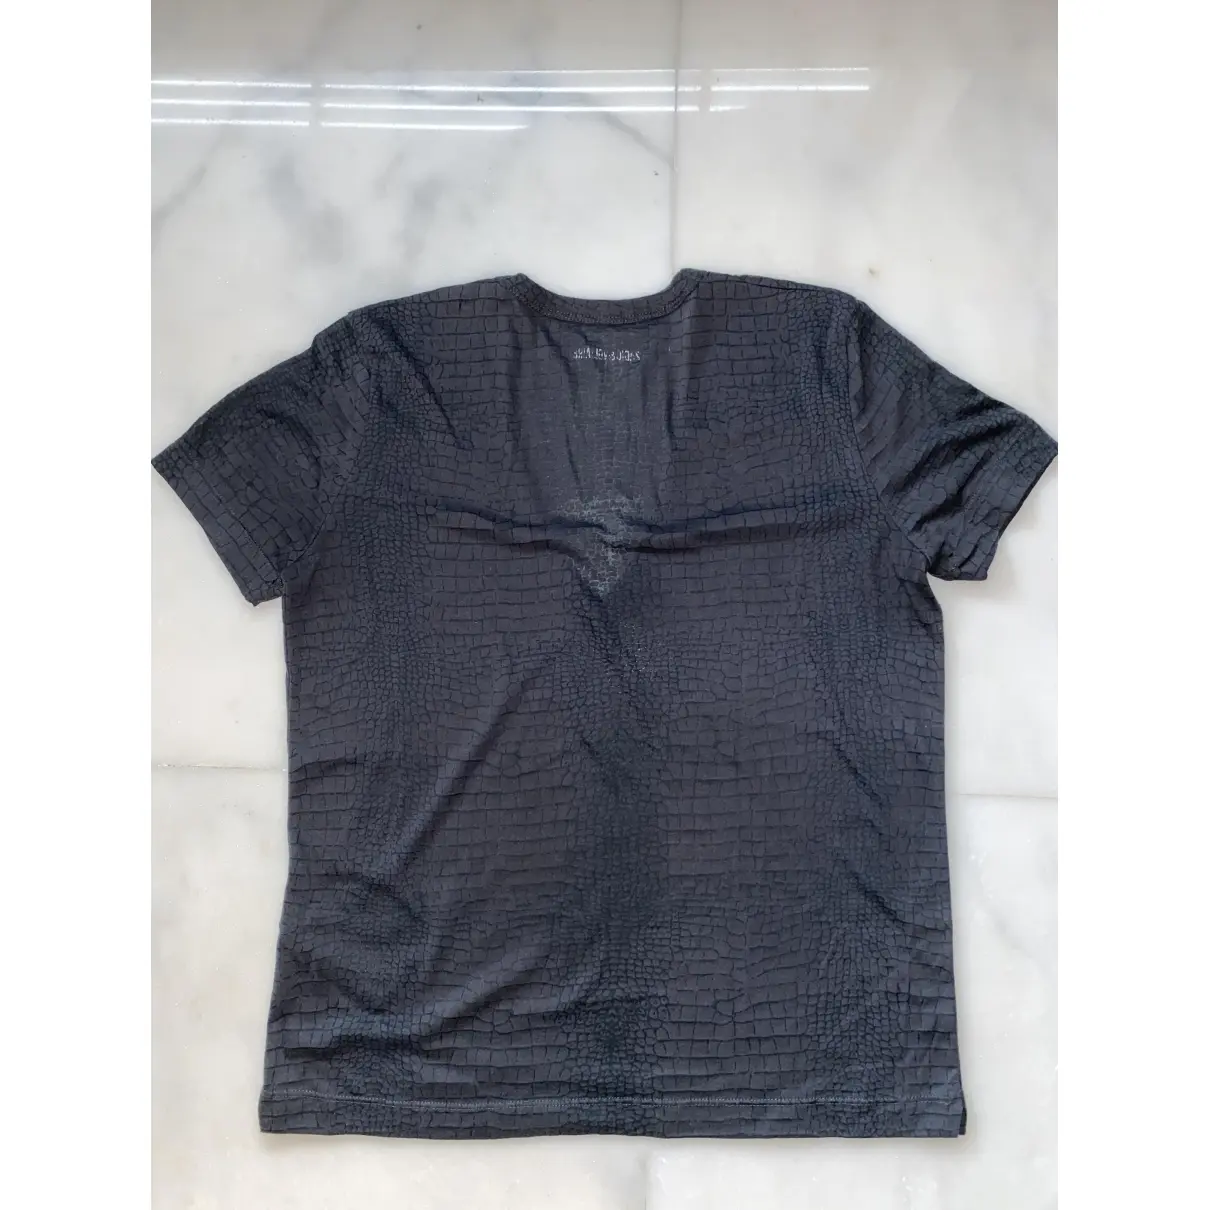 Zadig & Voltaire T-shirt for sale